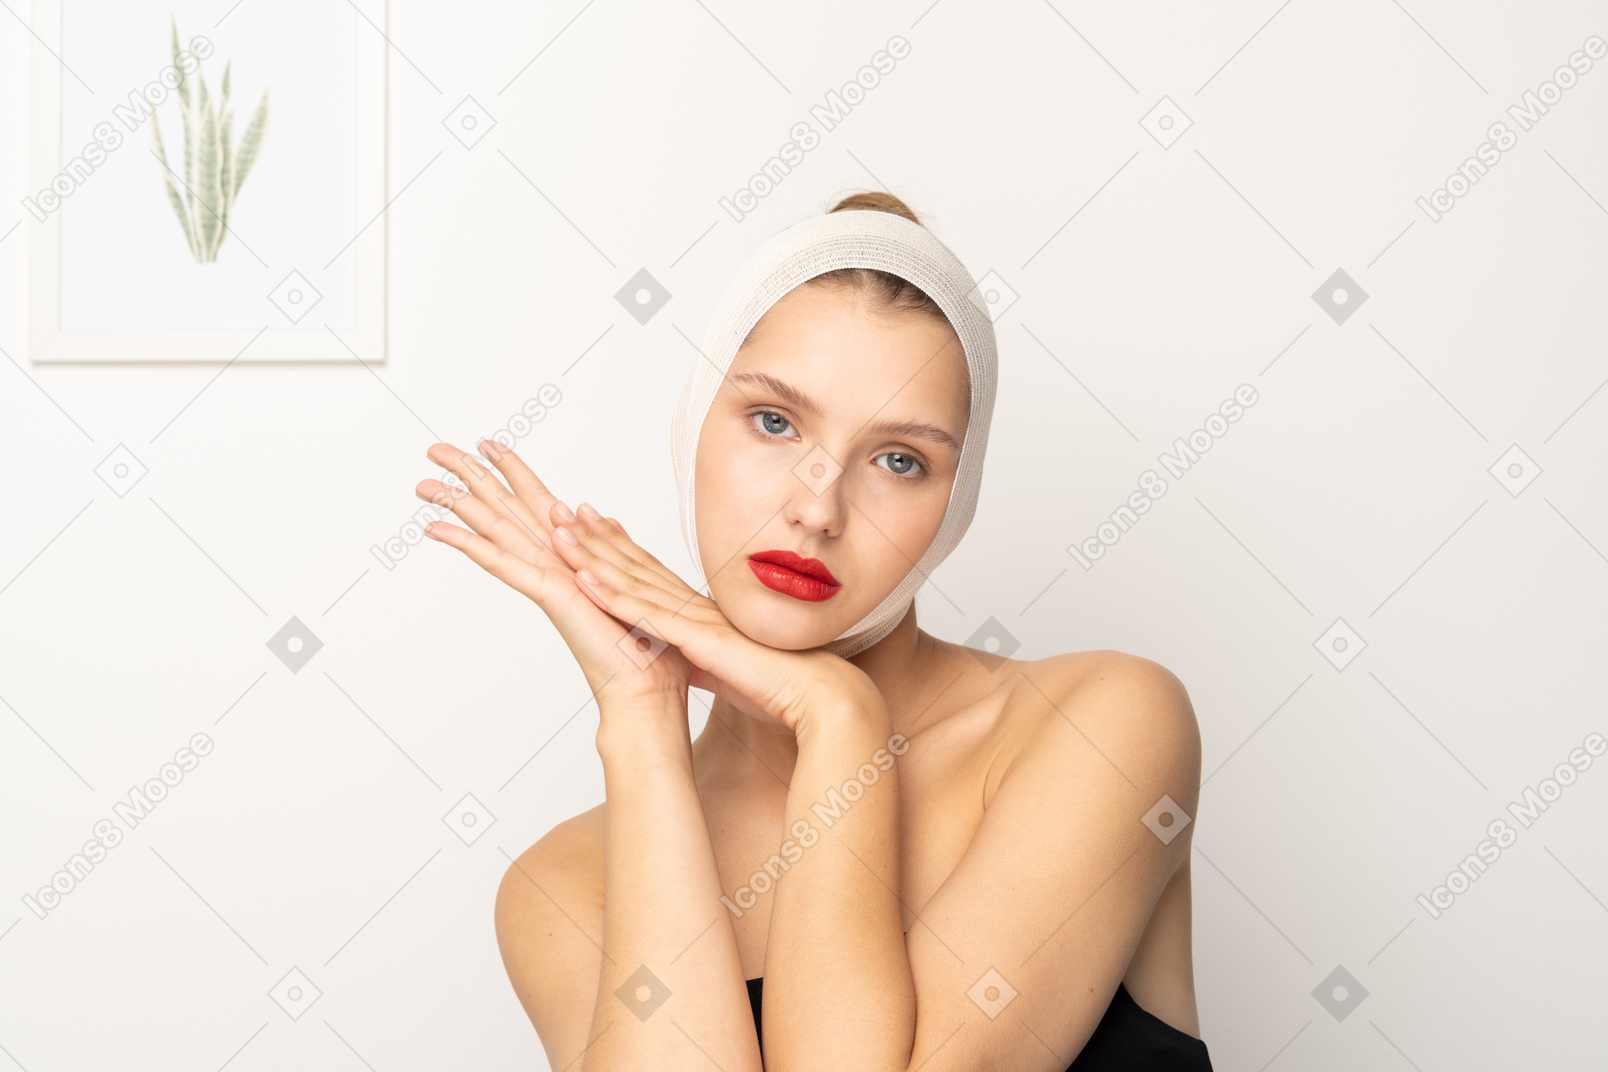 Woman with head bandage holding her hands together